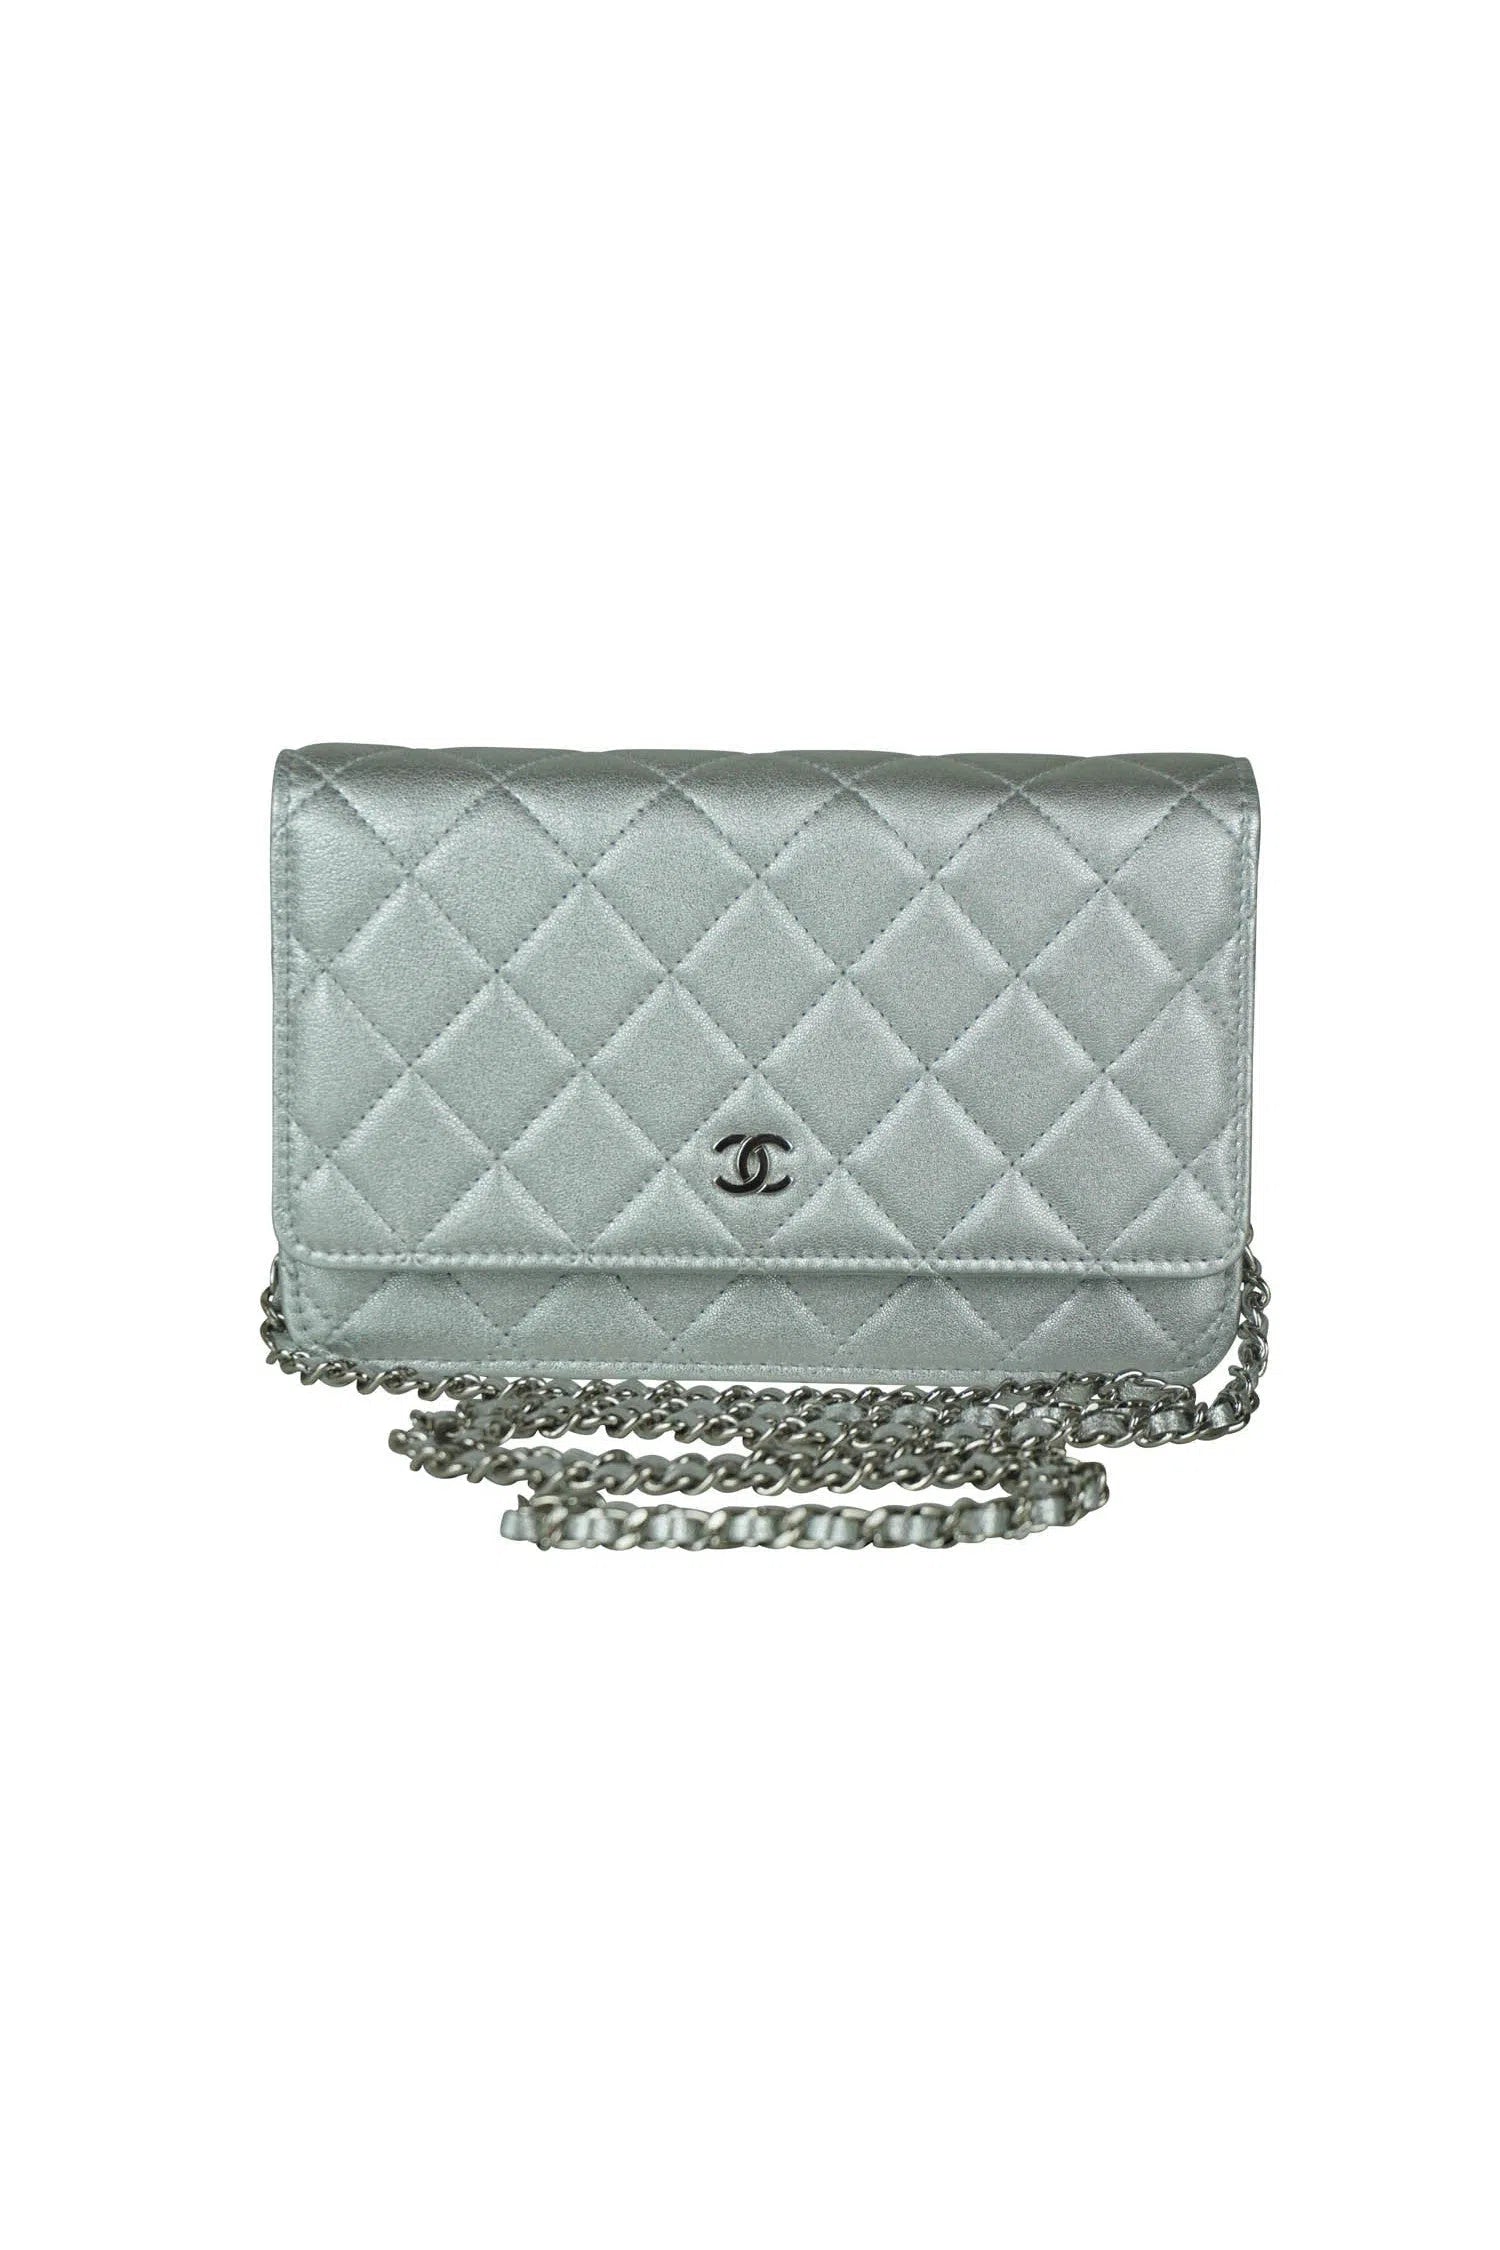 Chanel Classic Silver WOC Wallet on a Chain Purse 2021